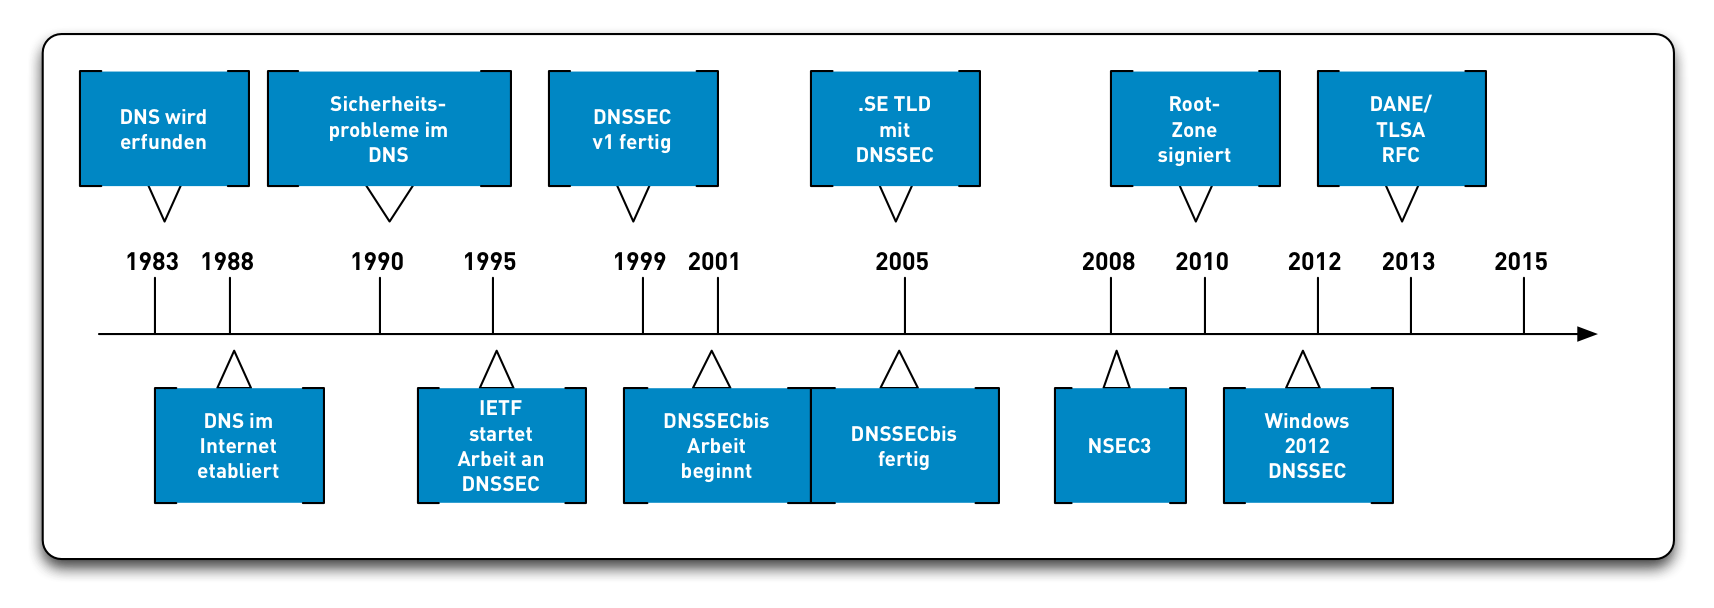 DNSSEC-History13.png